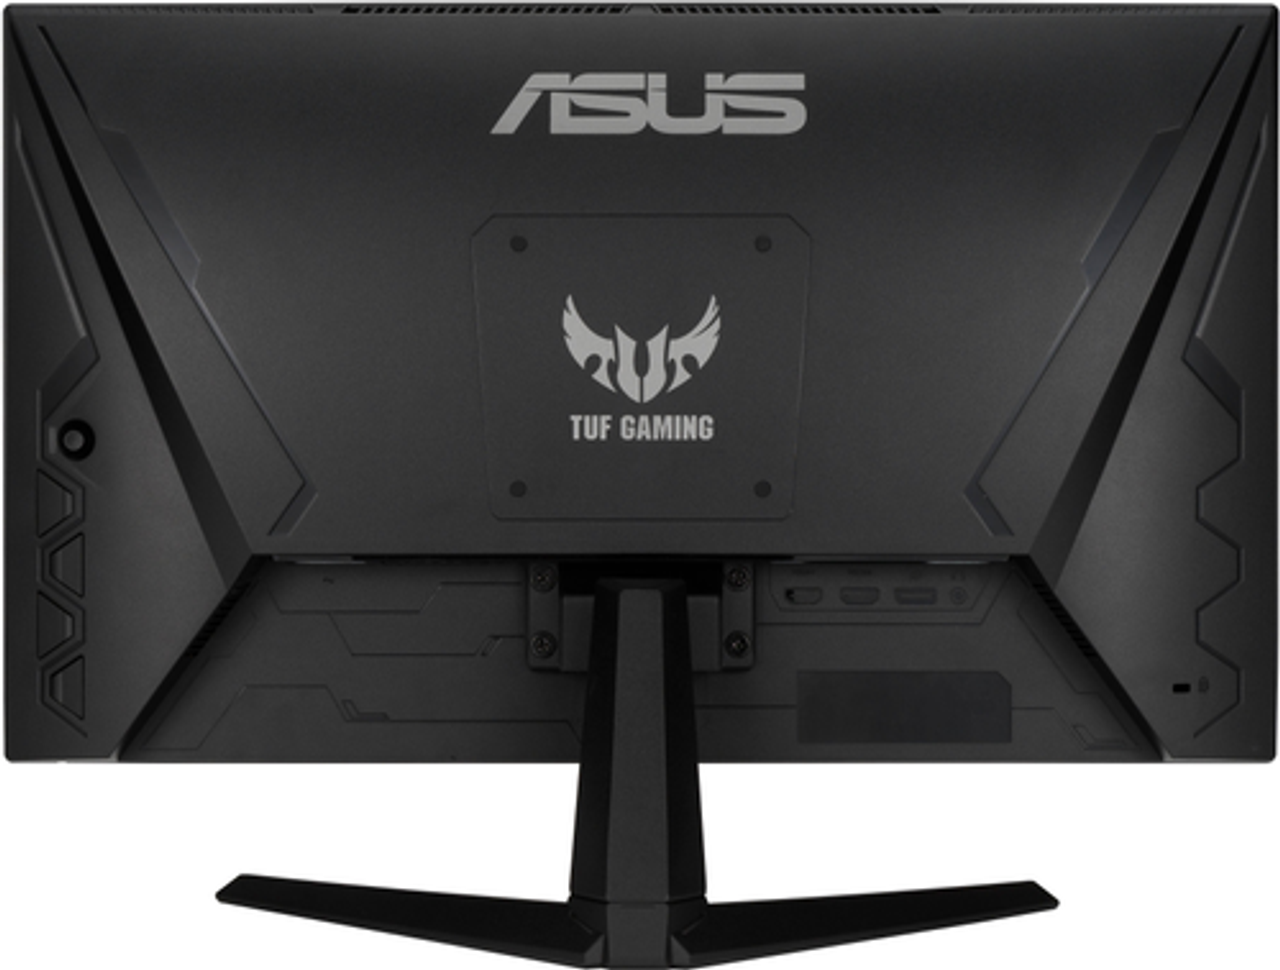 ASUS - TUF 23.8” IPS FHD 165Hz 1ms FreeSync Gaming Monitor with Height Adjustable (DisplayPort, HDMI) - Black